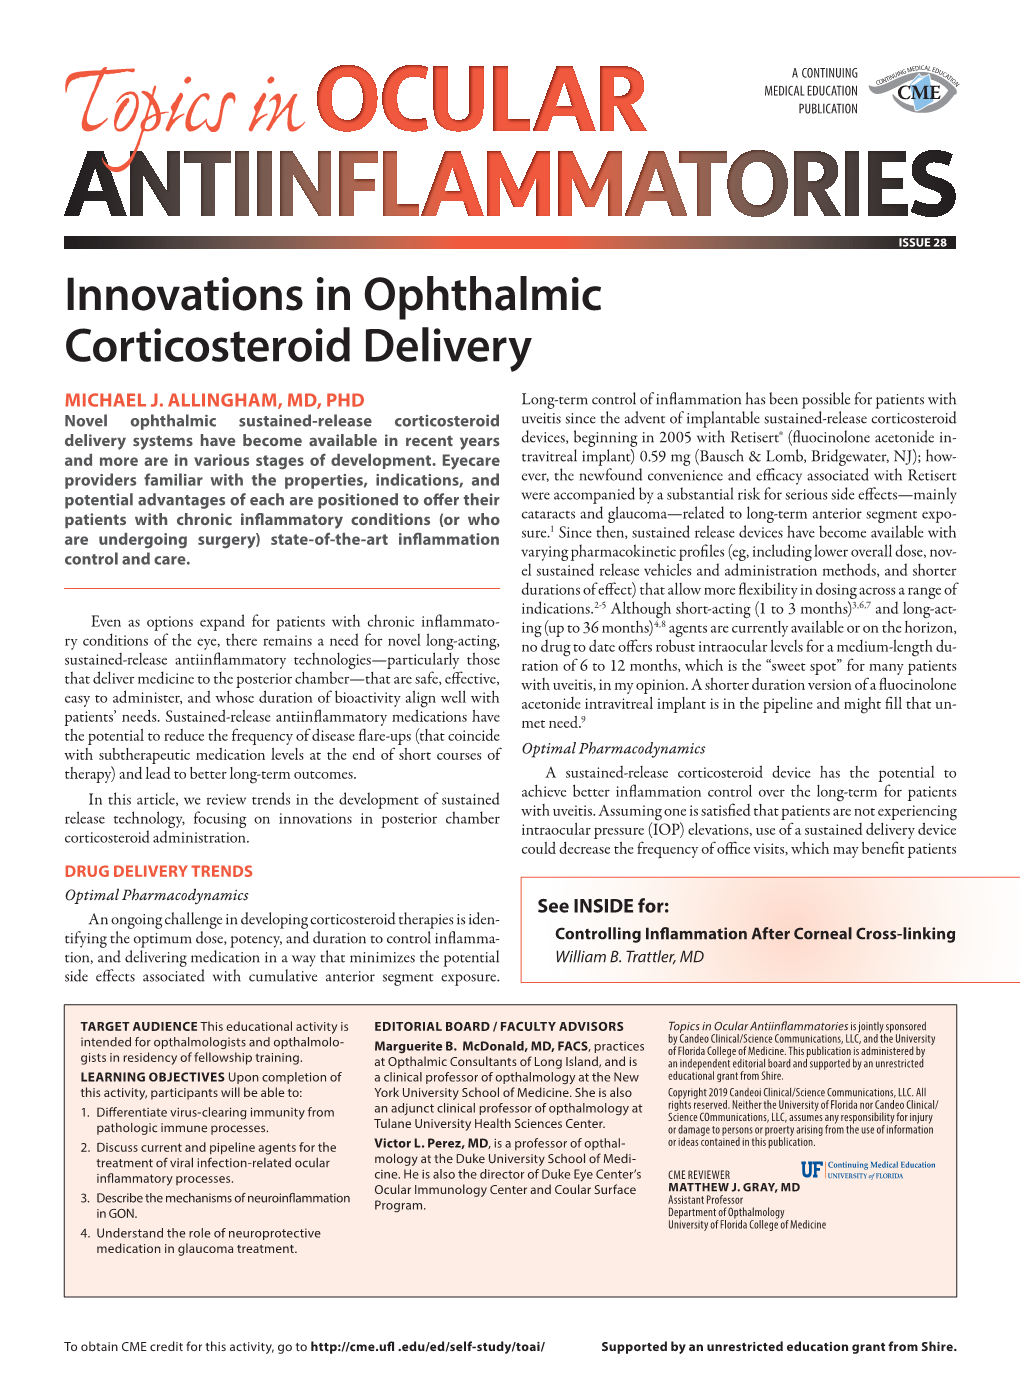 Innovations in Ophthalmic Corticosteroid Delivery